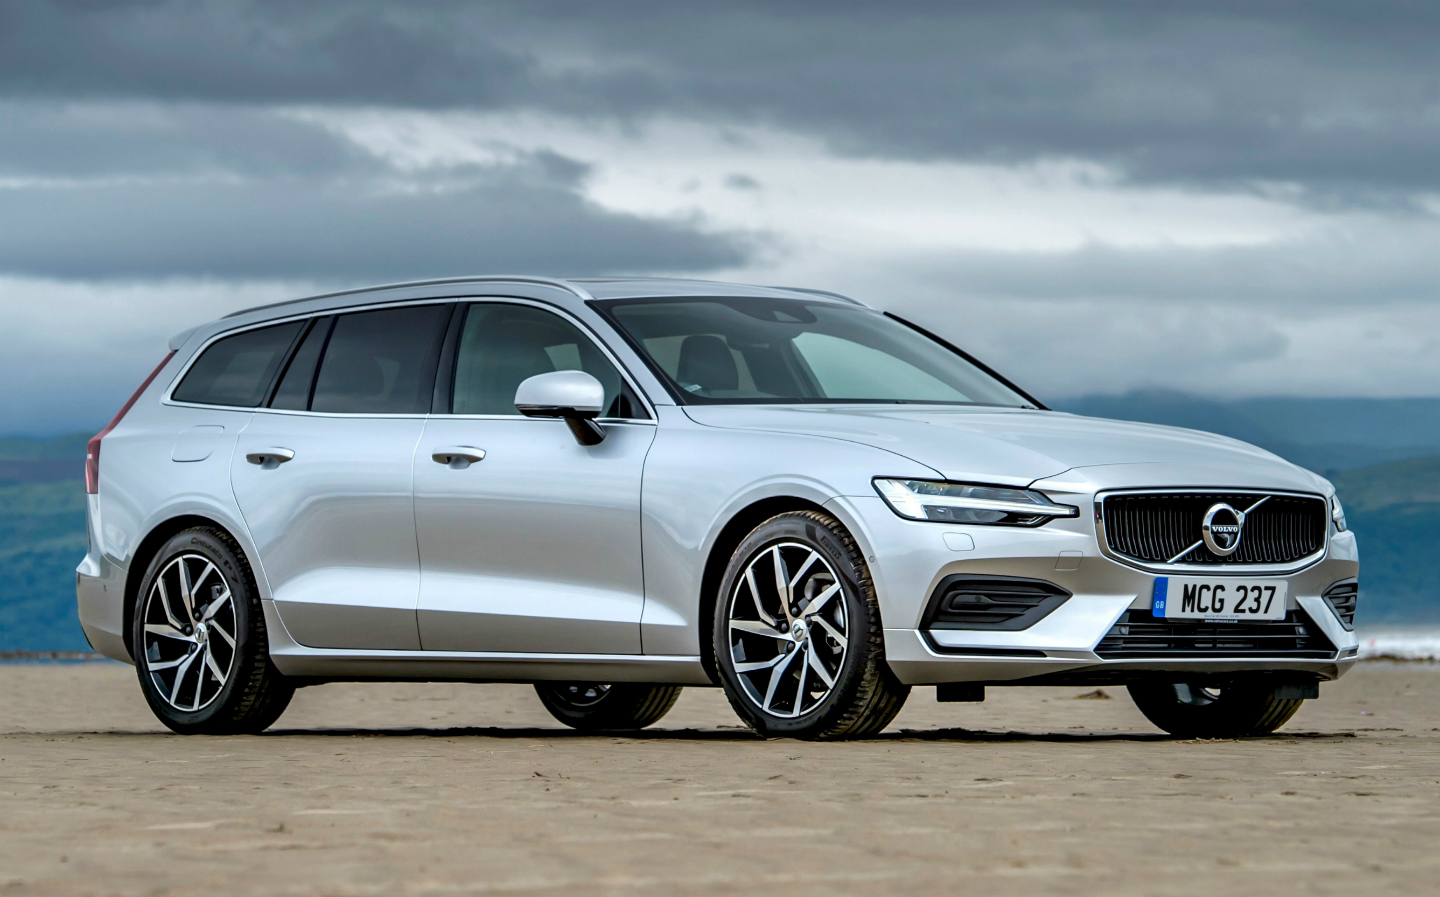 Sunday Times Motor Awards 2019: Best Family Car of the Year nominees. Volvo V60